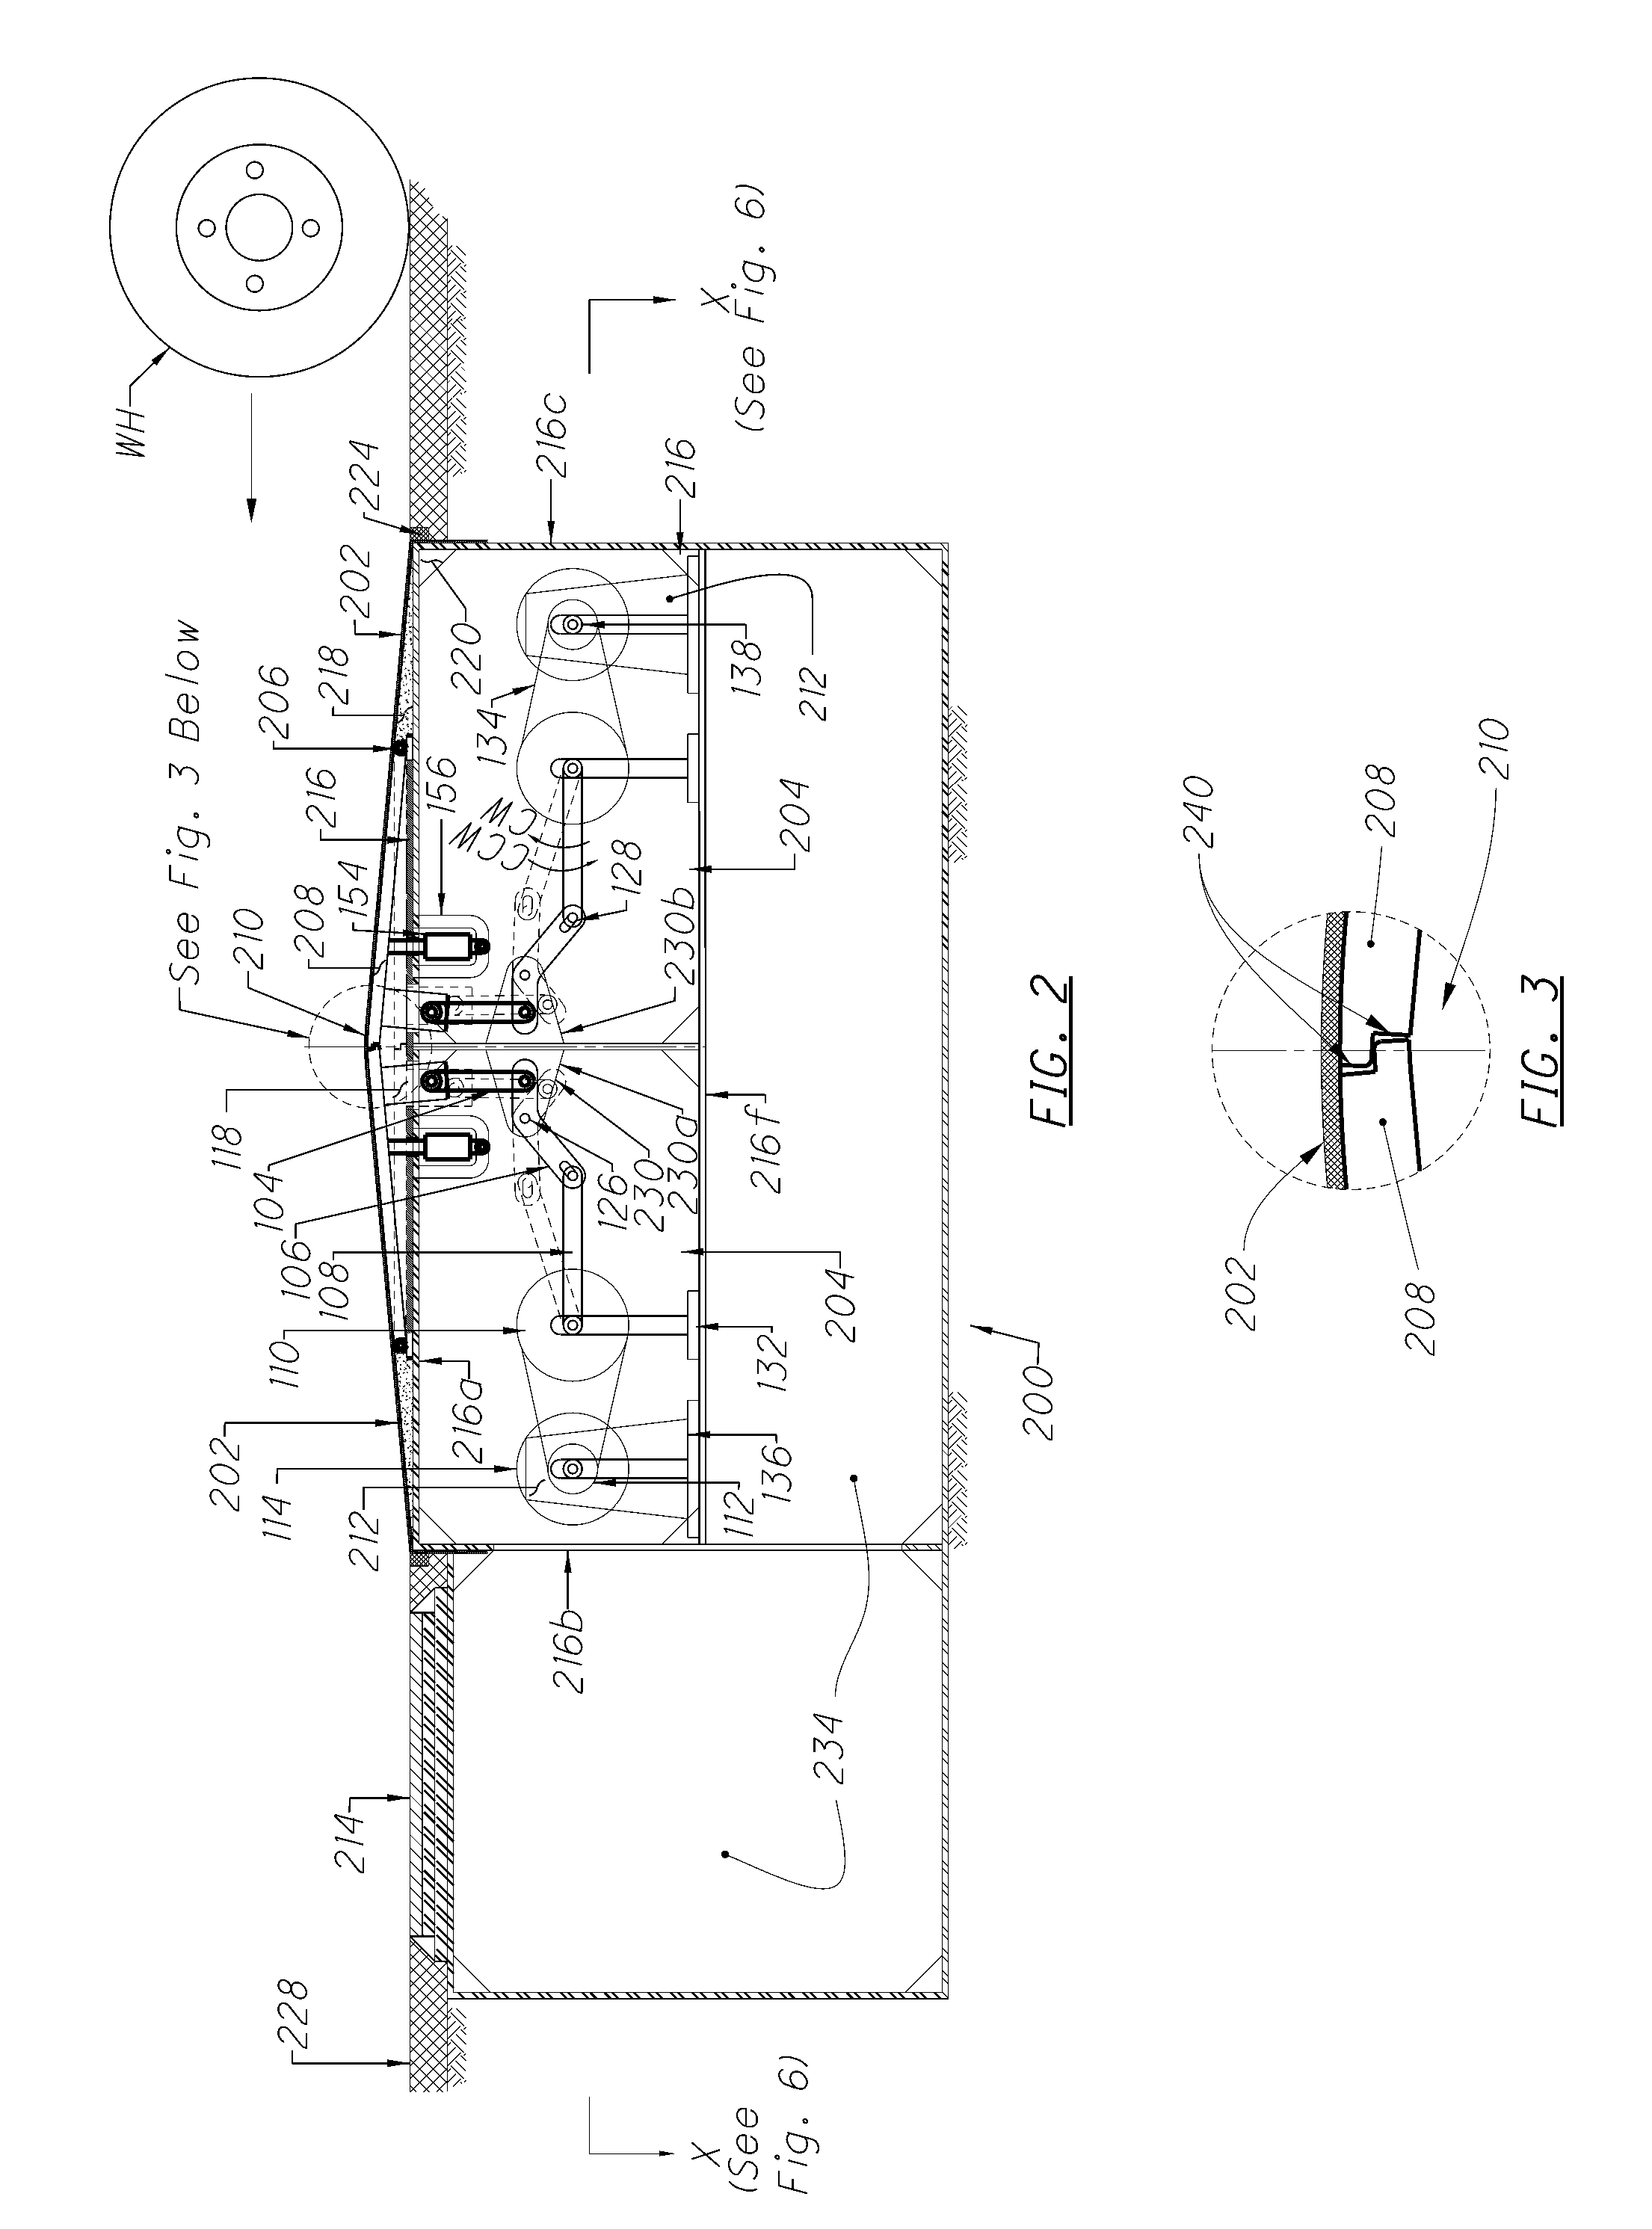 Electrical generator apparatus, particularly for use on a vehicle roadway